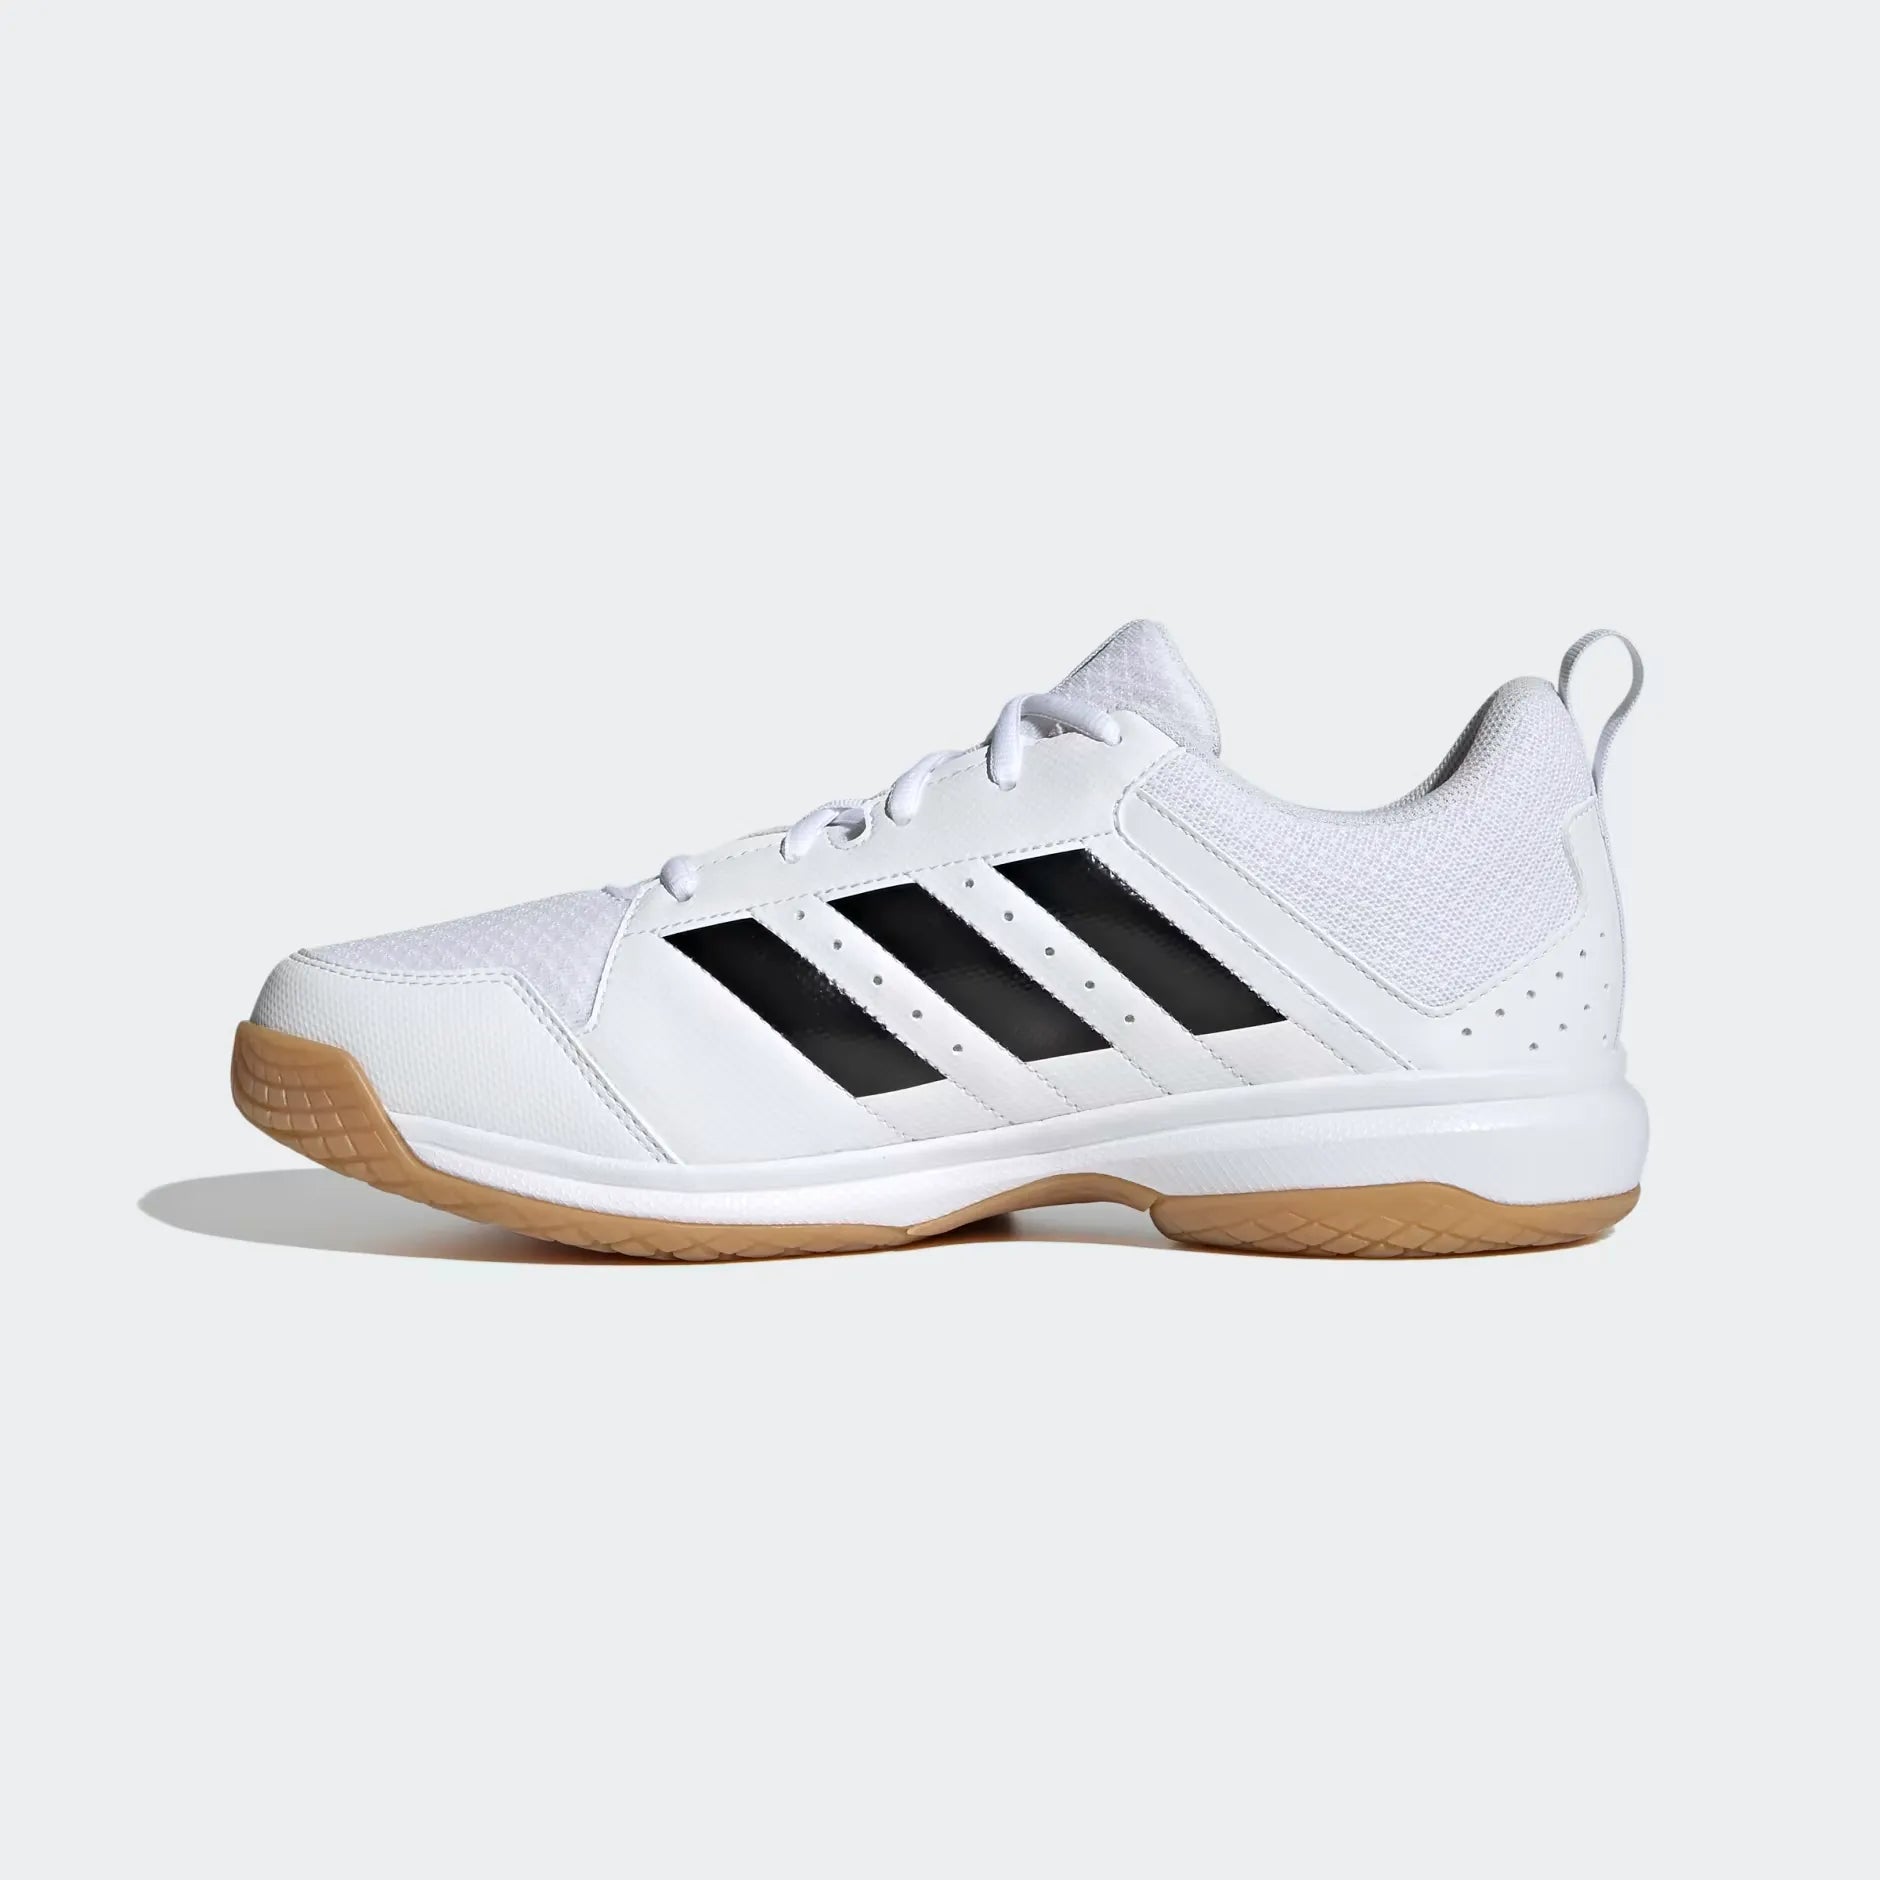 Adidas Ligra 7 GZ0069 White sneakers. Shop these lightweight and sleek shoes for men, perfect for everyday wear.